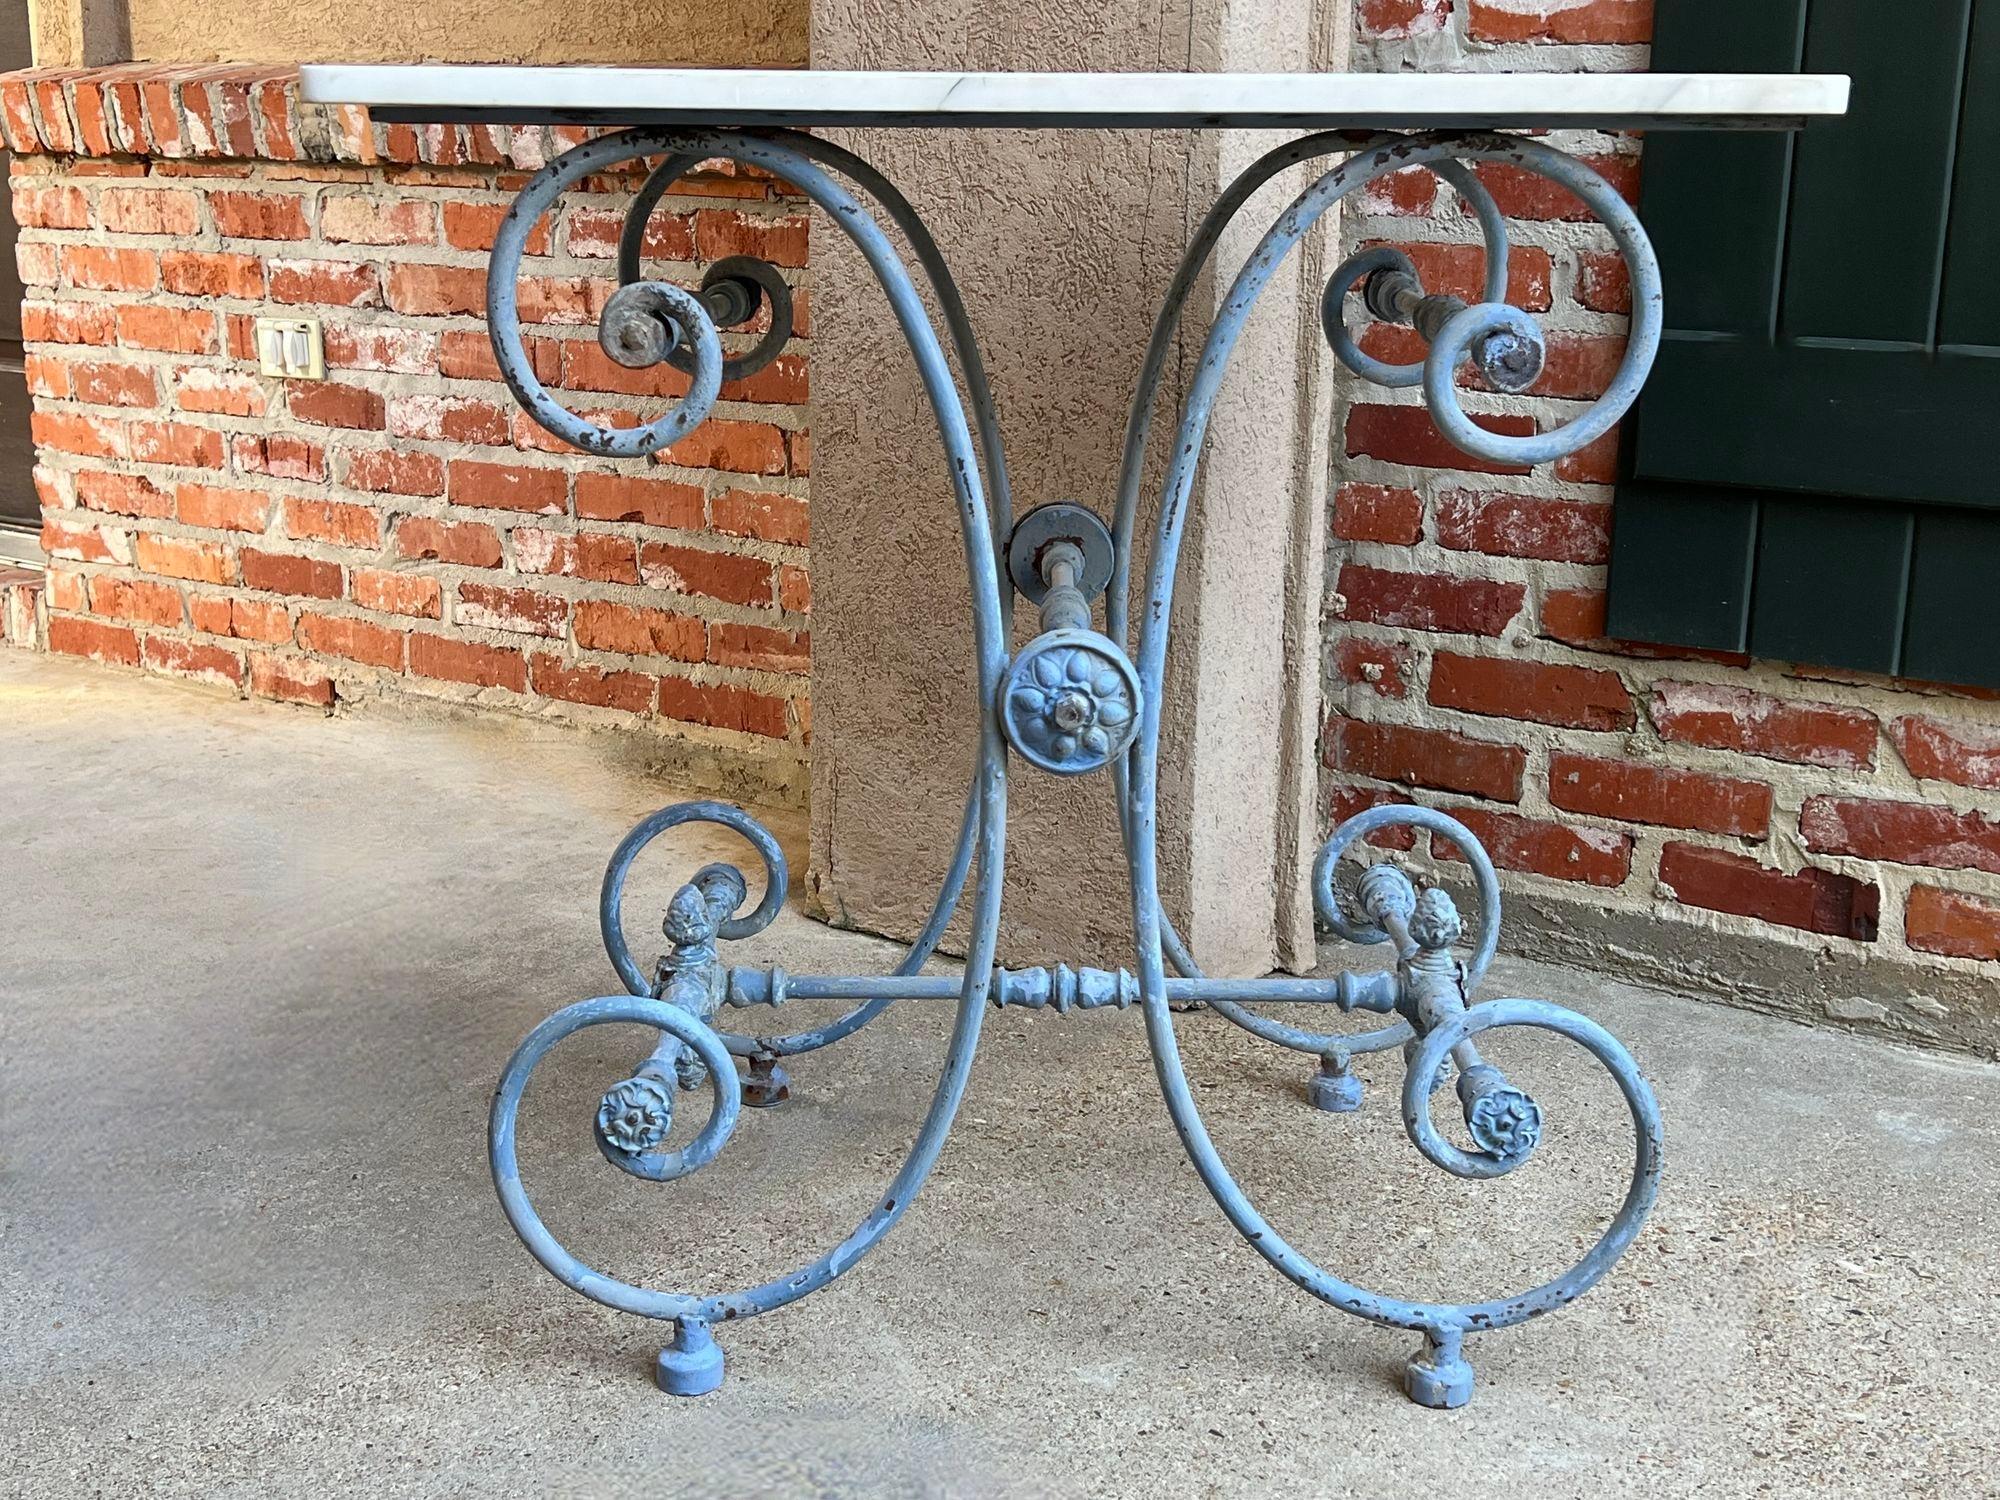 Antique French Pastry Baker’s Table Blue Iron White Marble Small Kitchen Island.

Direct from France, a fabulous (and highly sought after) antique French Pastry or “Patisserie” table!!! The elaborate, heavy scrolling iron base has a classic French